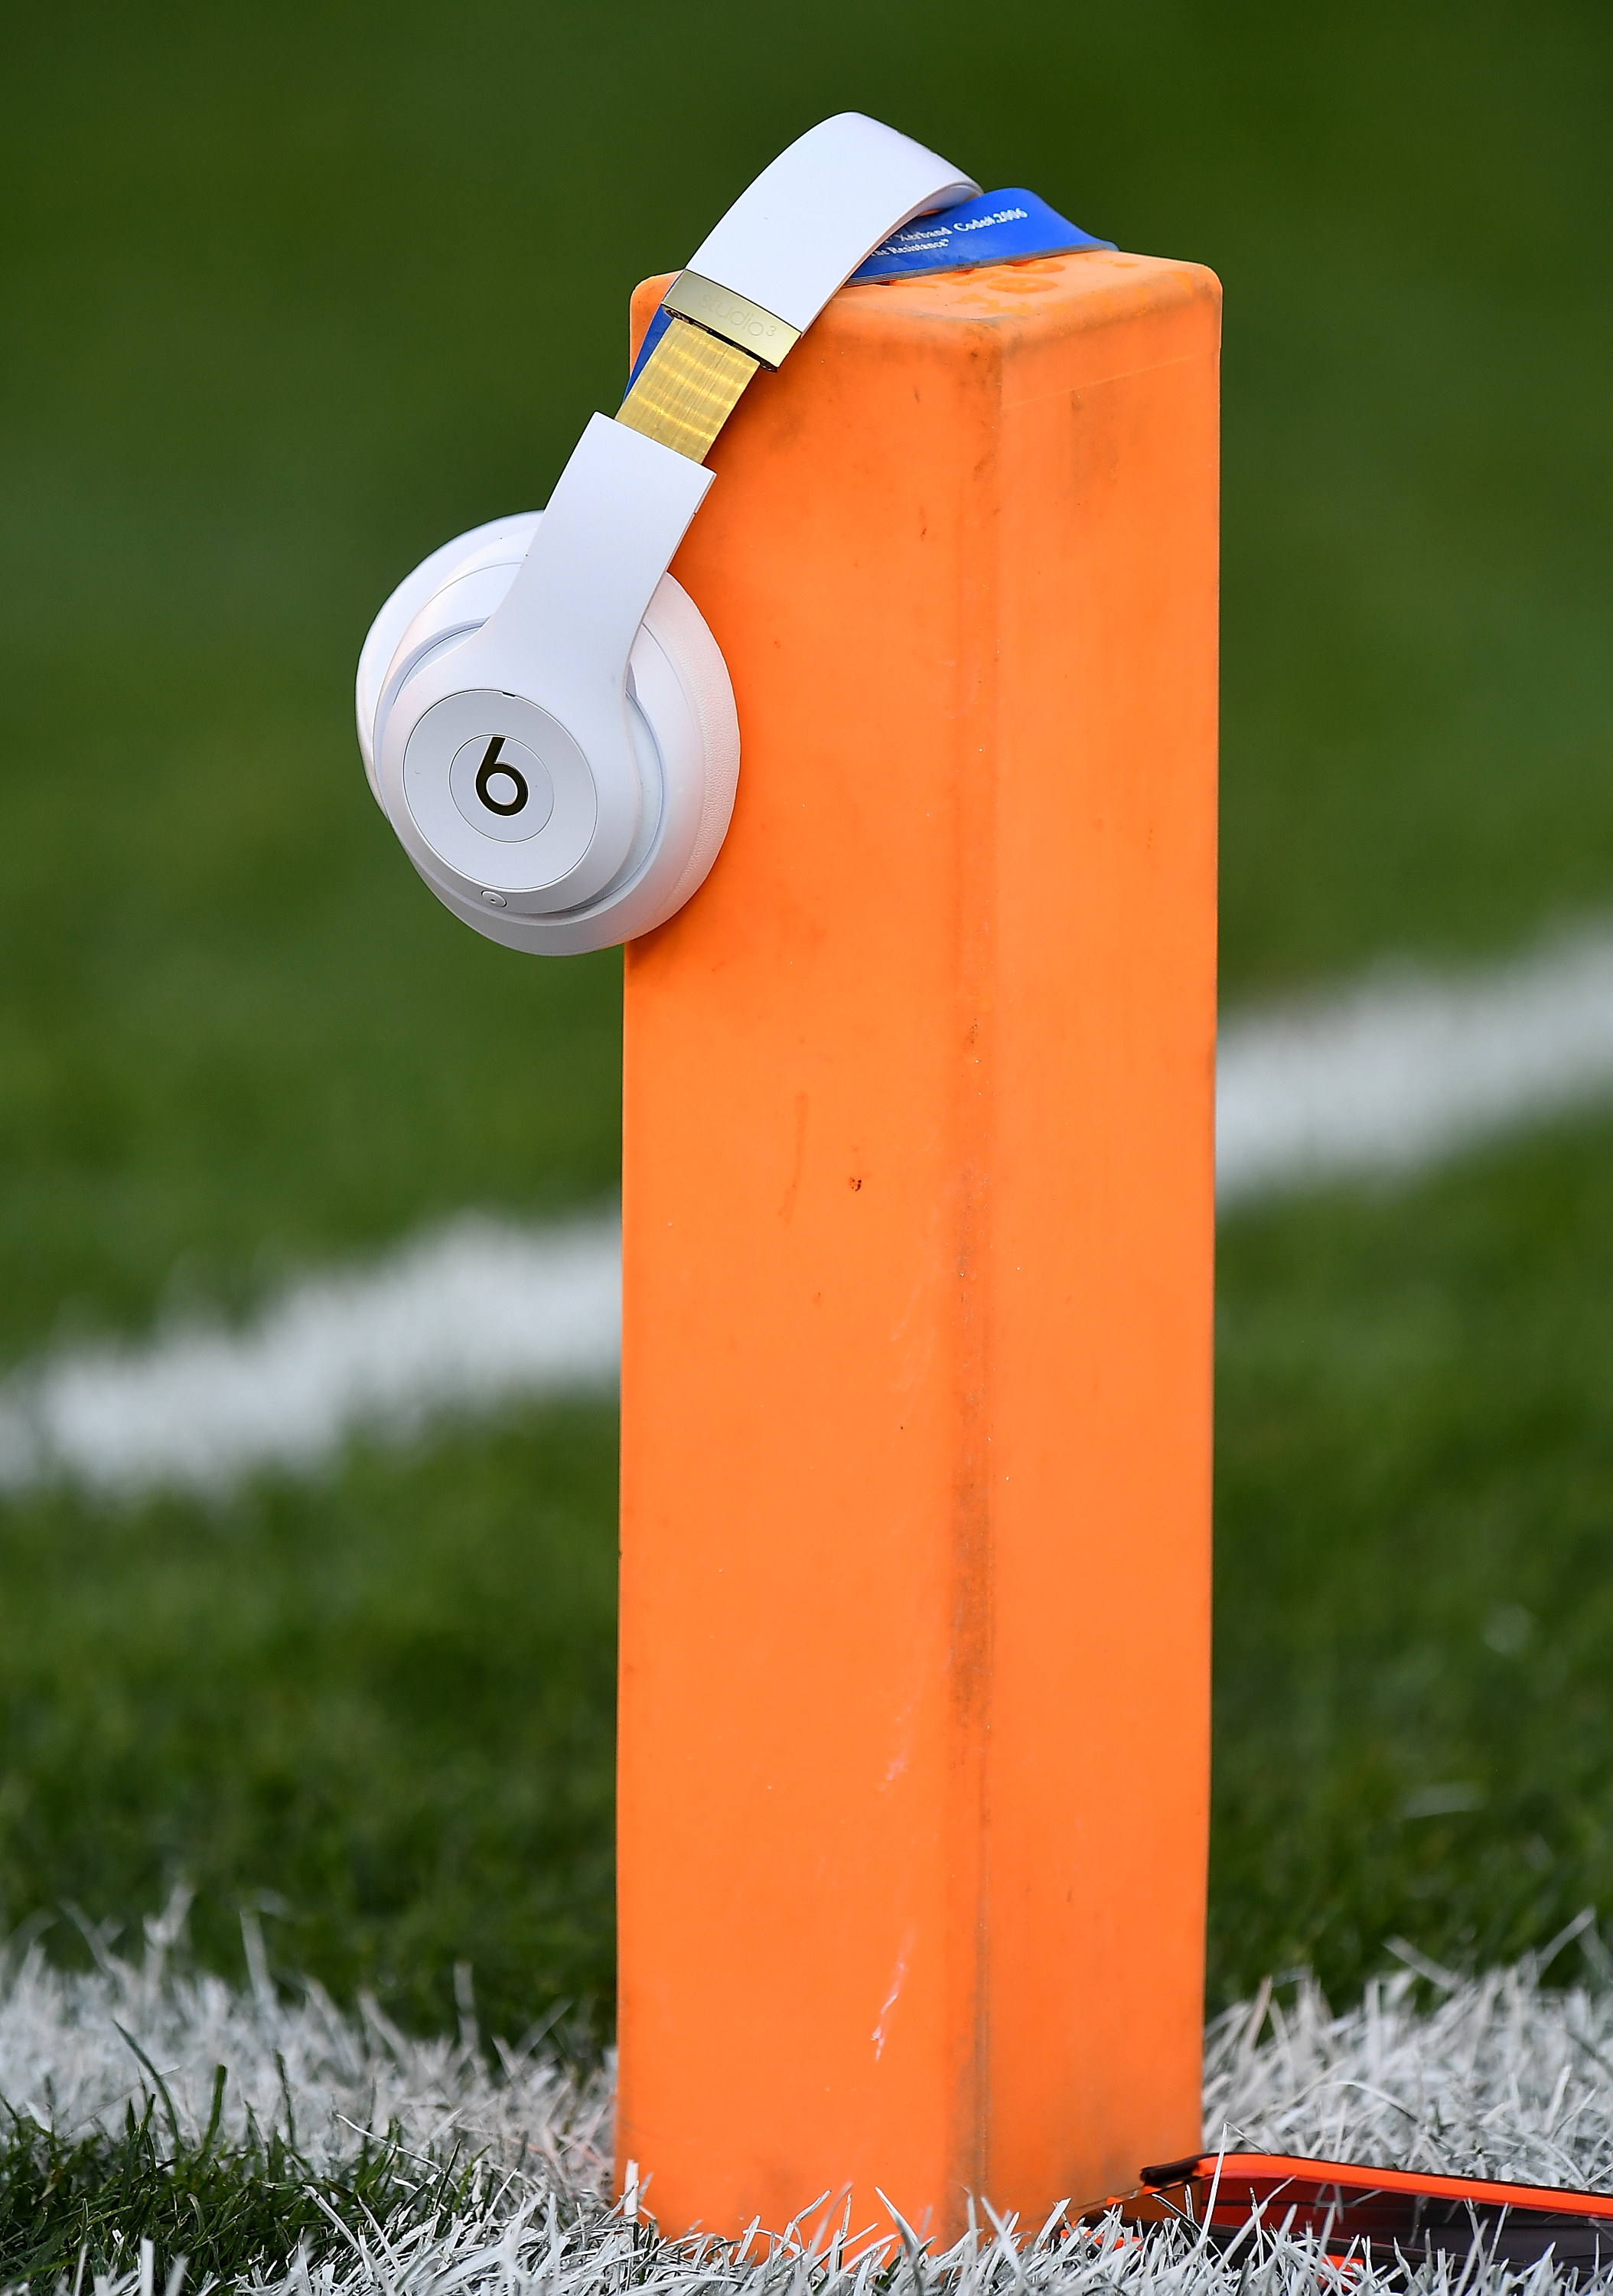 A pair of Beats by Dre headphones resting on a small pillar on a football field